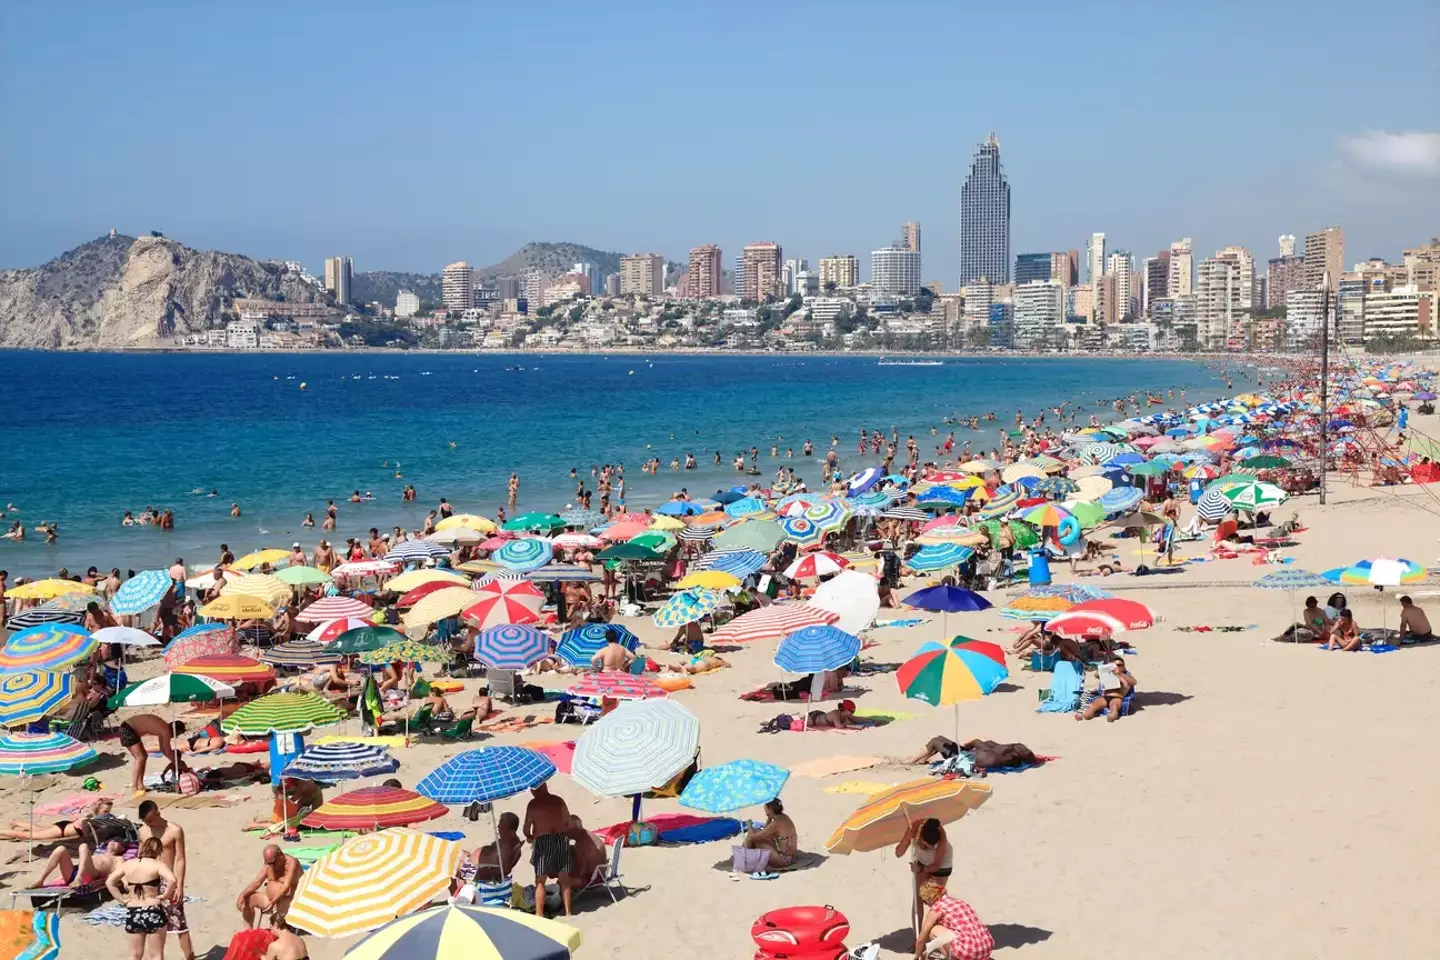 Brits aren’t happy that they may have to prove they’ve got enough money to fund their trips to Spain.